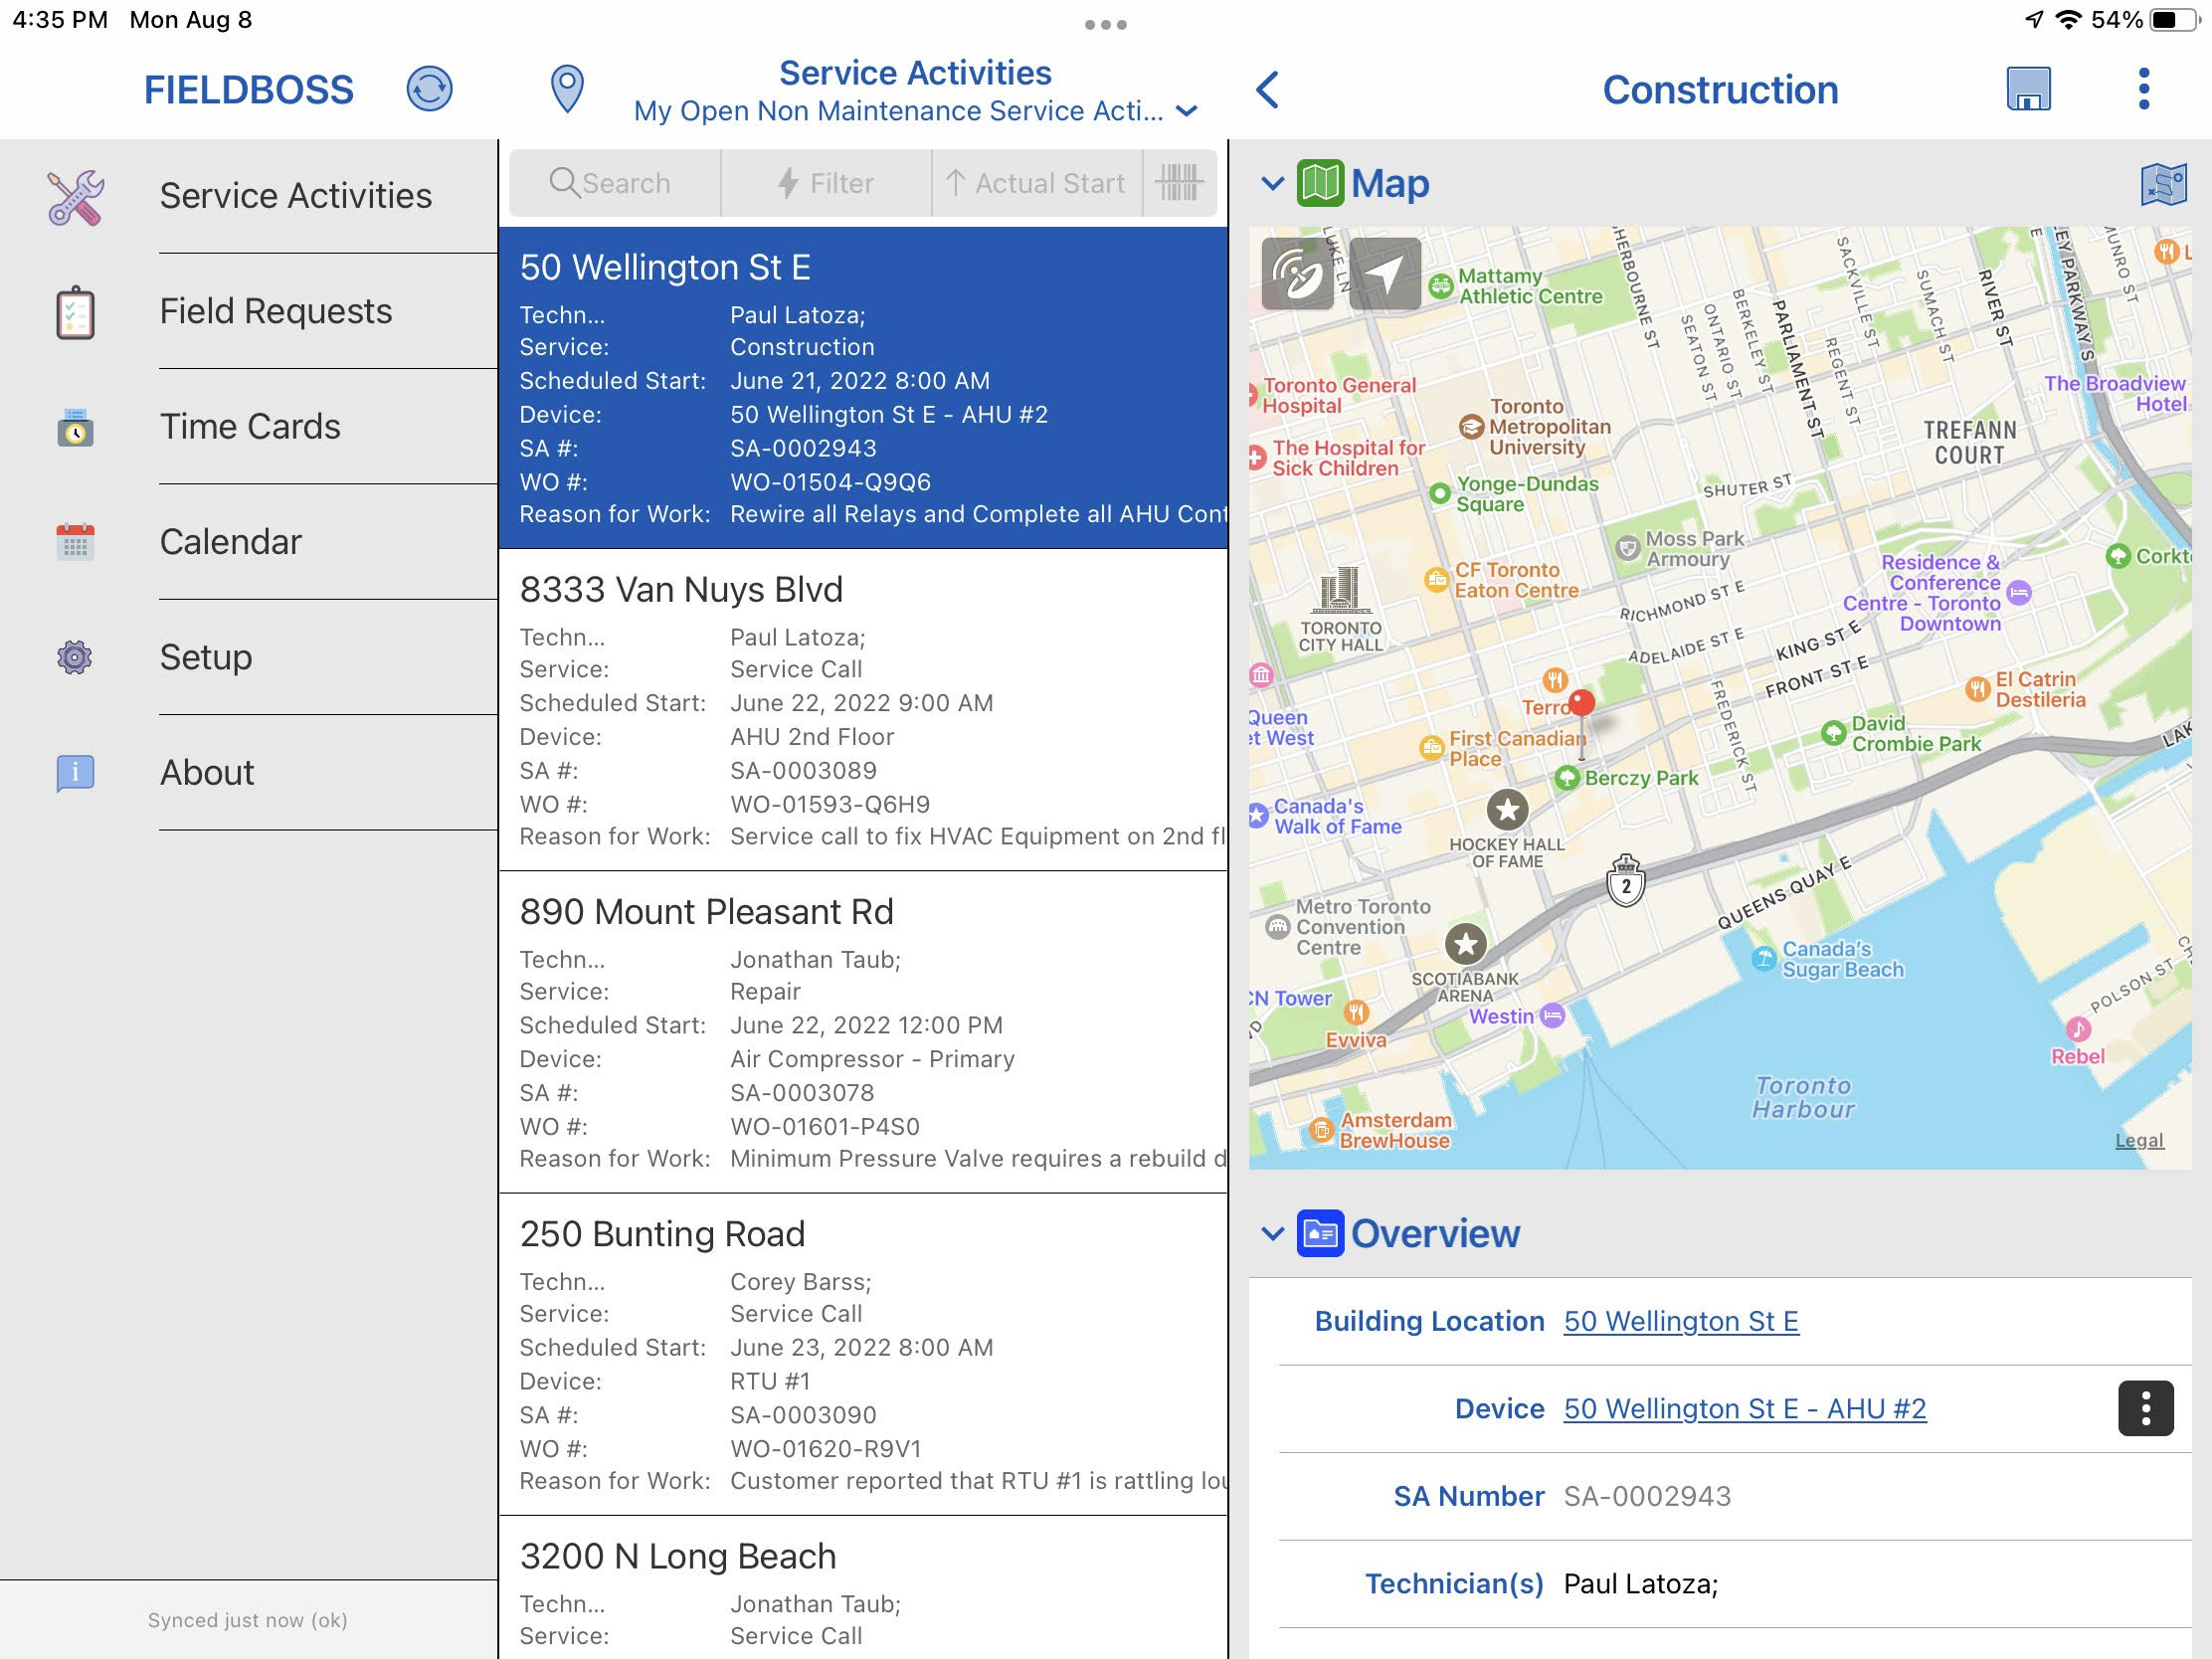 Service activity with map view on tablet